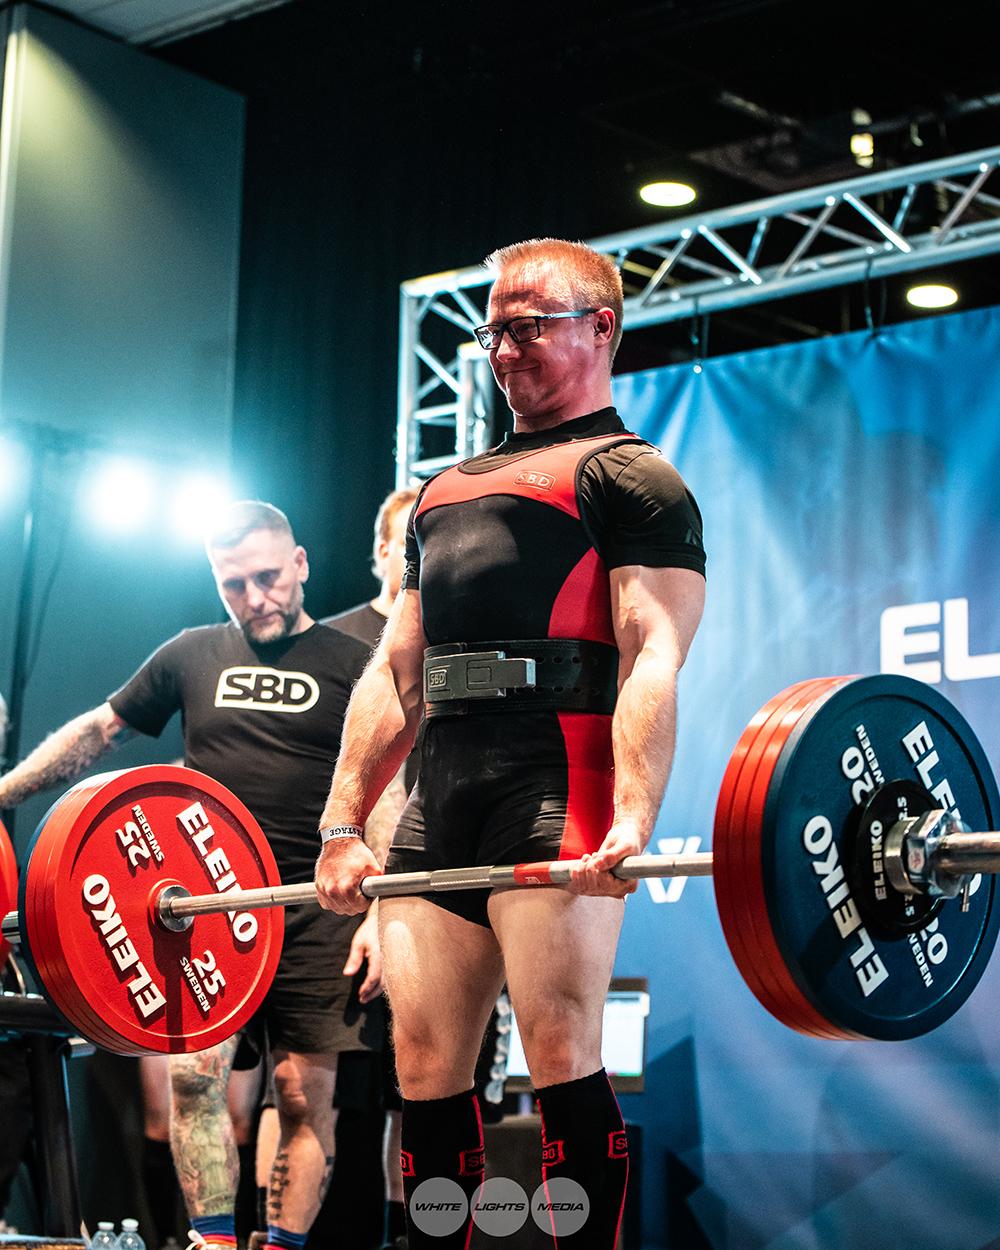 An easy first lift, picture of Andrew reaching full lockout with 215 kg on deadlift